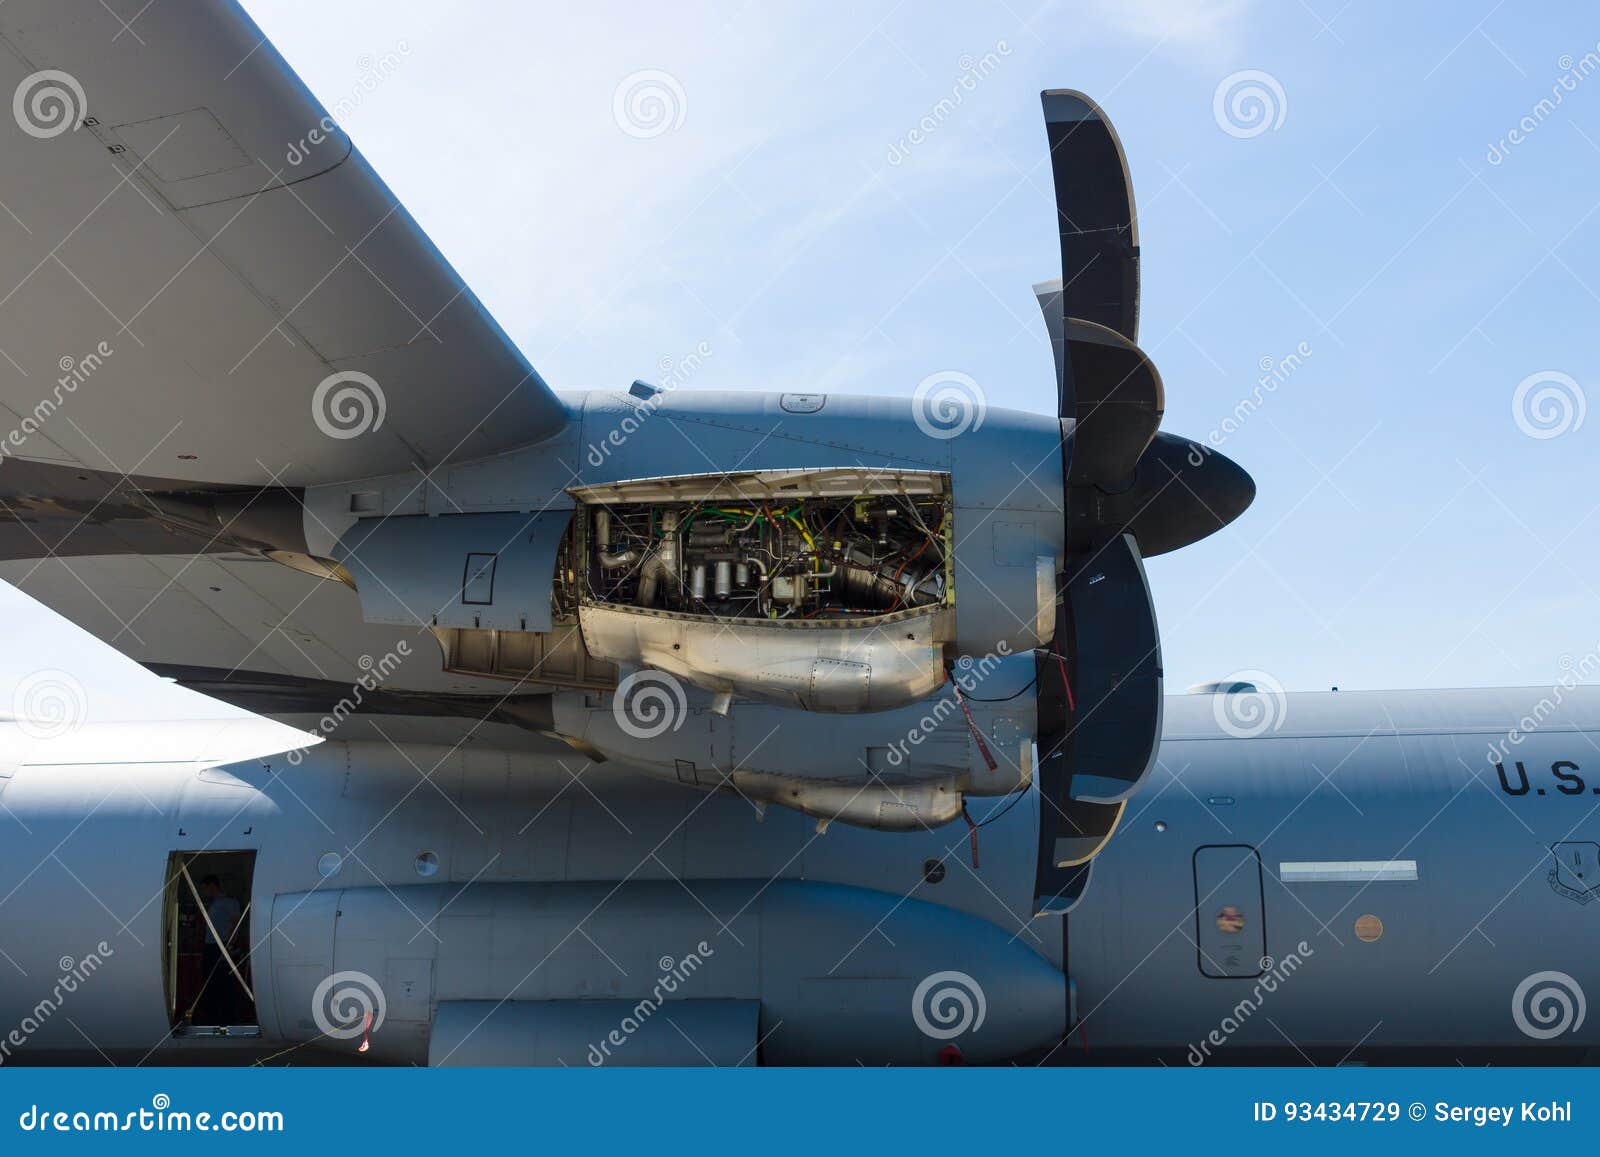 Turboprop Engine Rolls Royce Ae 2100d3 Of A Military Transport Aircraft Lockheed Martin C 130j Super Hercules Editorial Stock Image Image Of Engine International